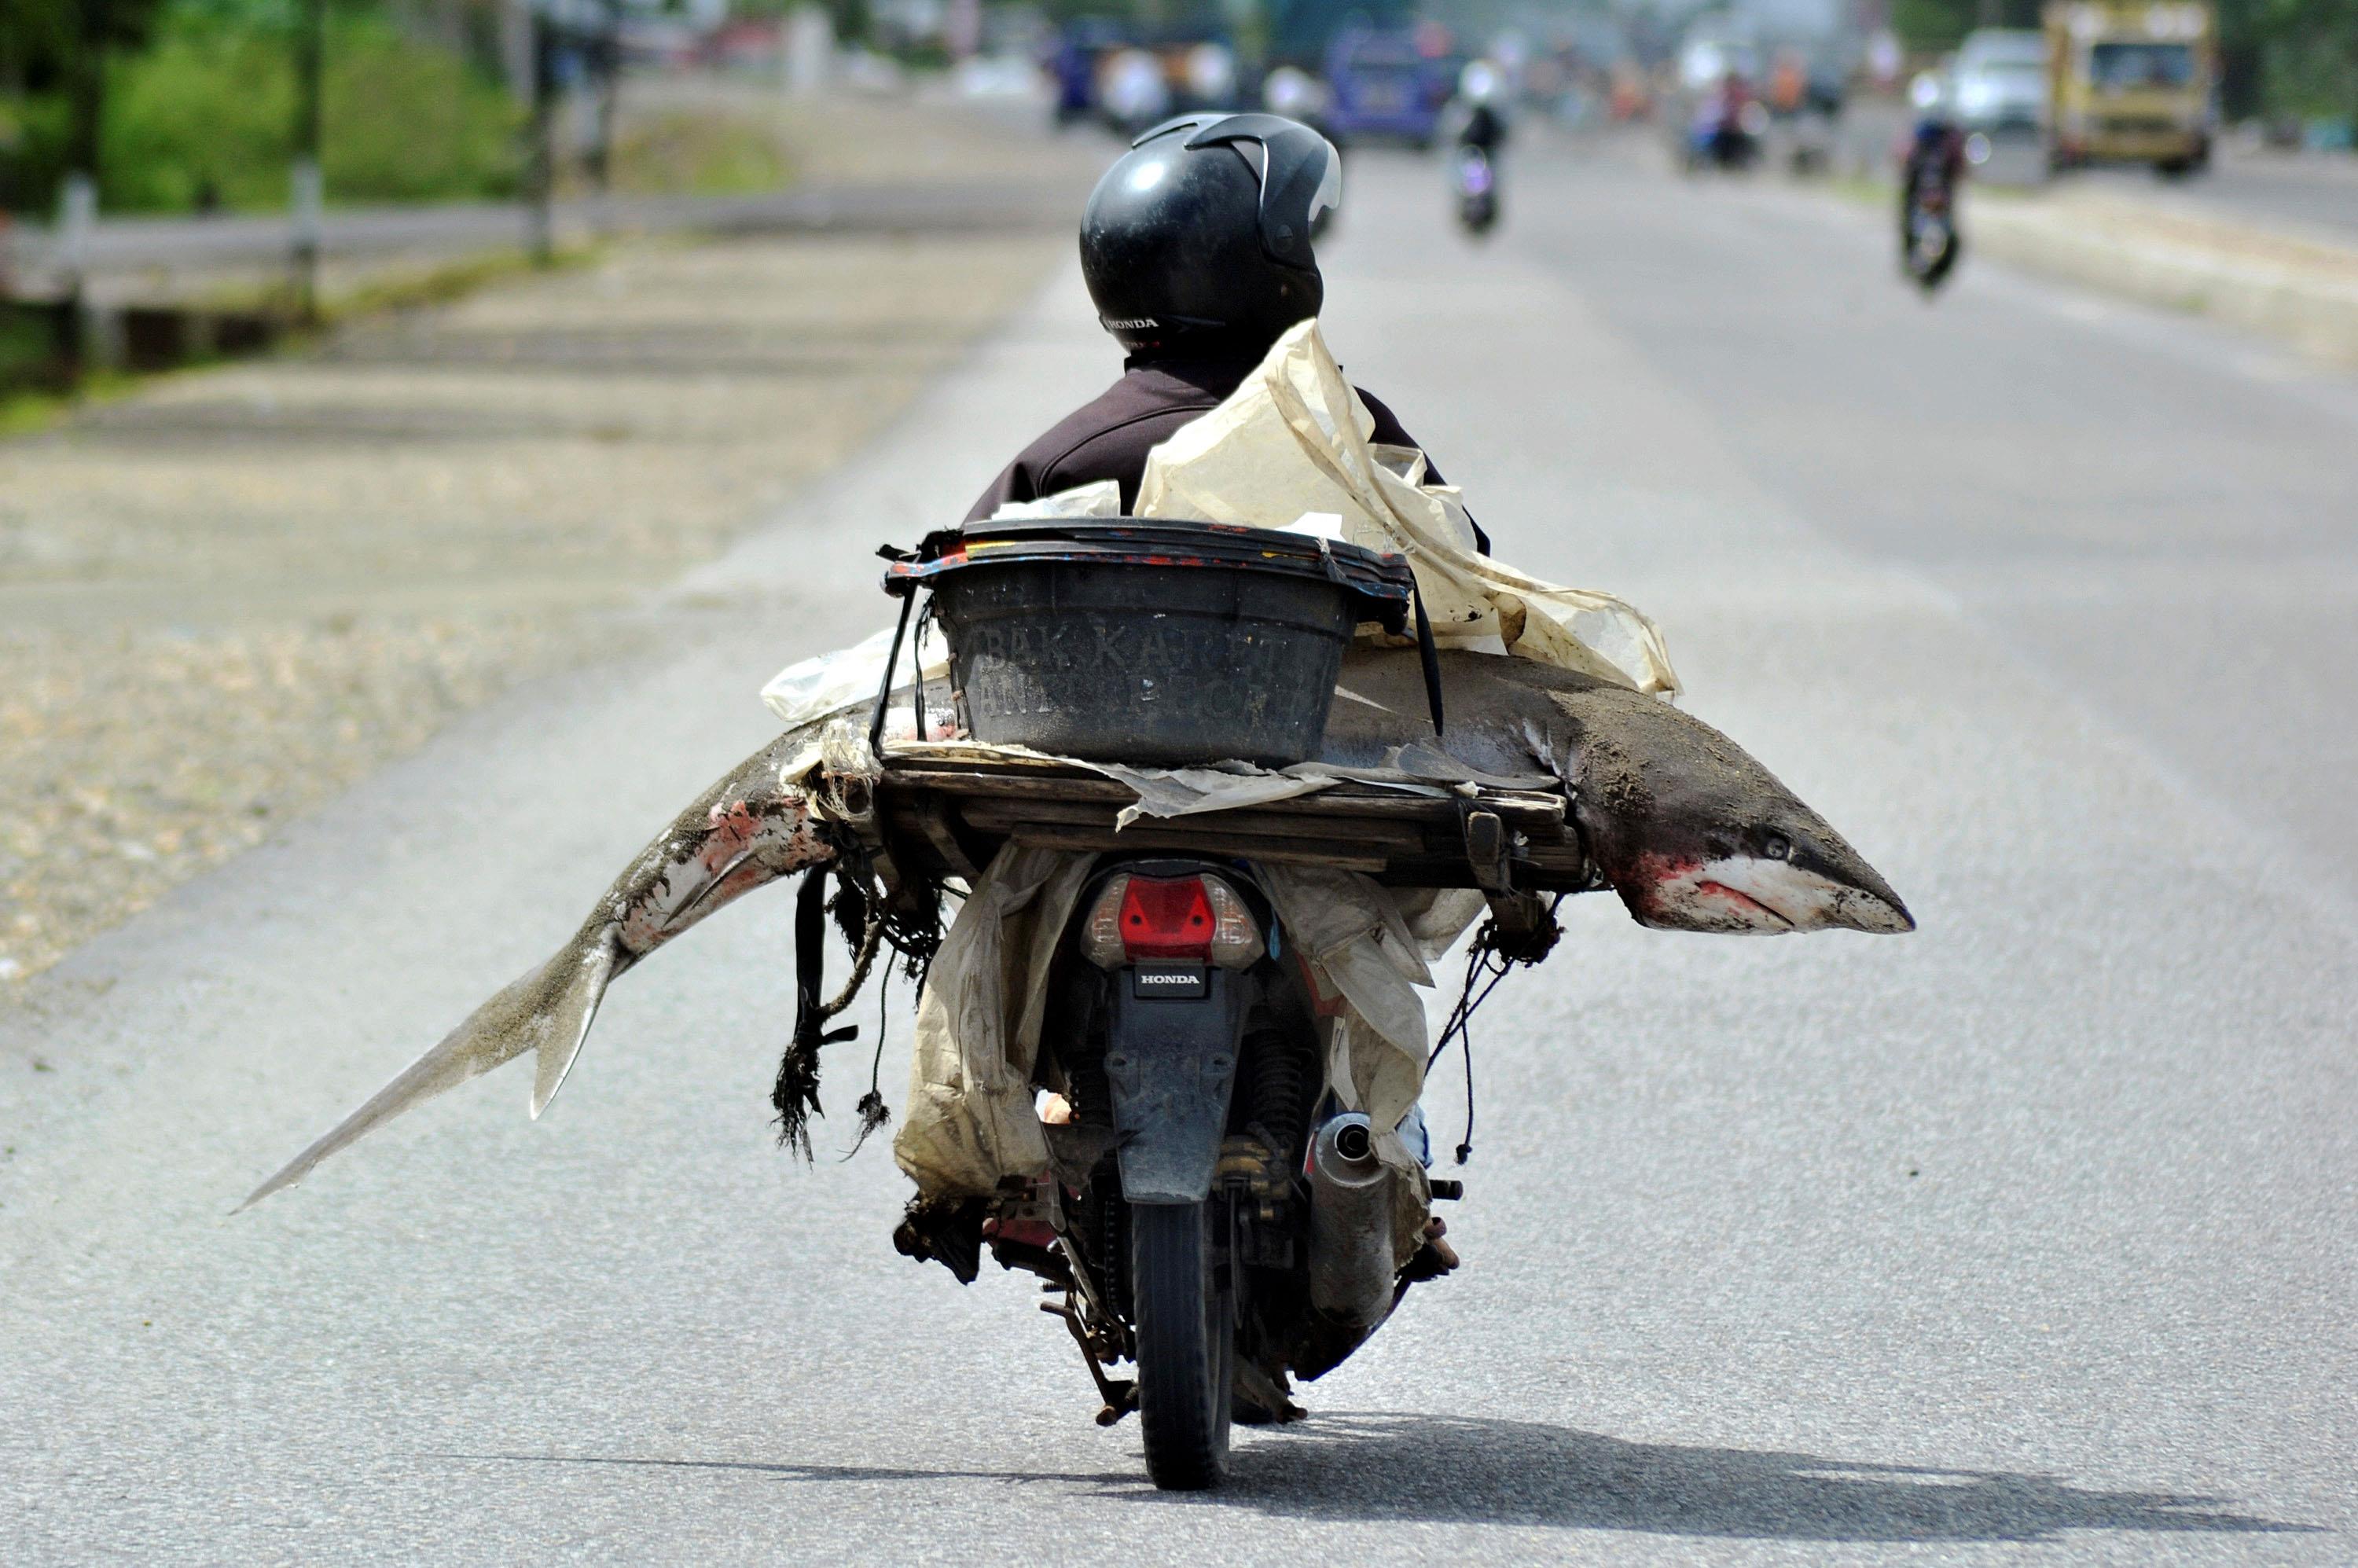 A fishmonger carries a shark on his motorcycle in Padang, West Sumatra